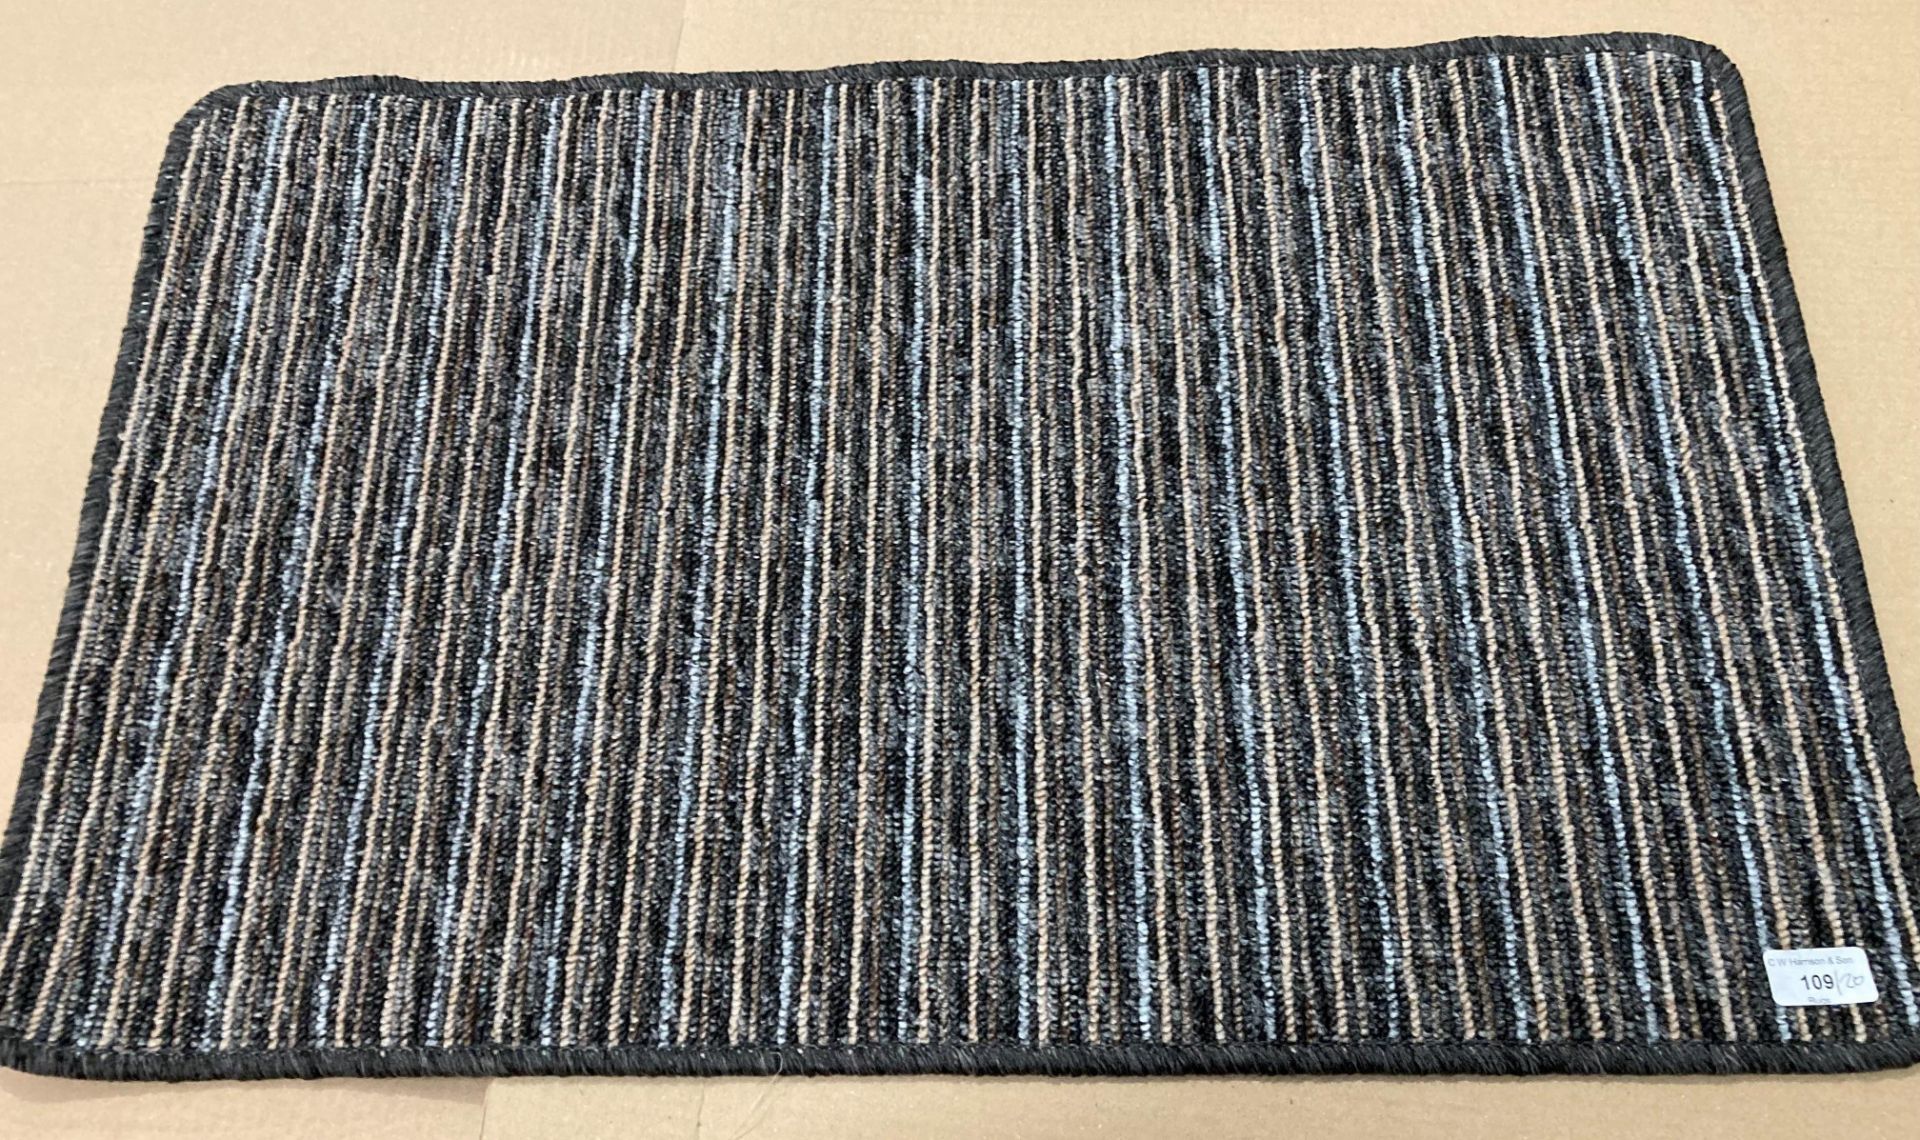 20 x brown and grey striped mats 80cm x 50cm *Please note the final purchase price is subject to